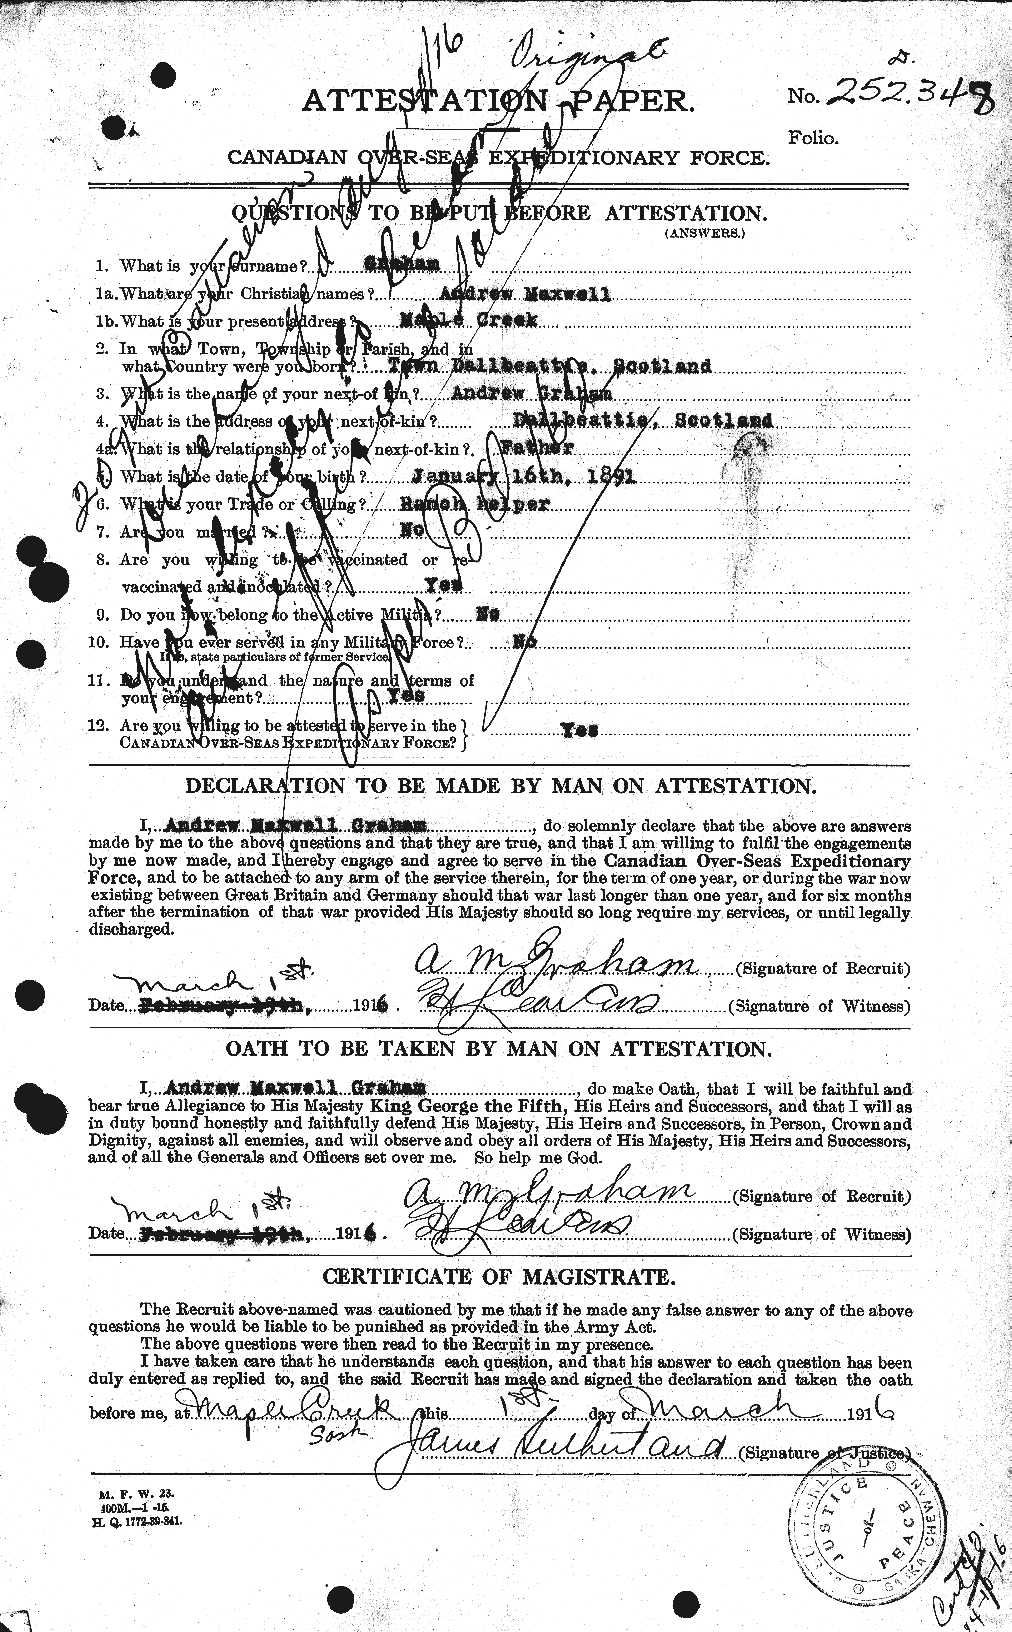 Personnel Records of the First World War - CEF 359617a